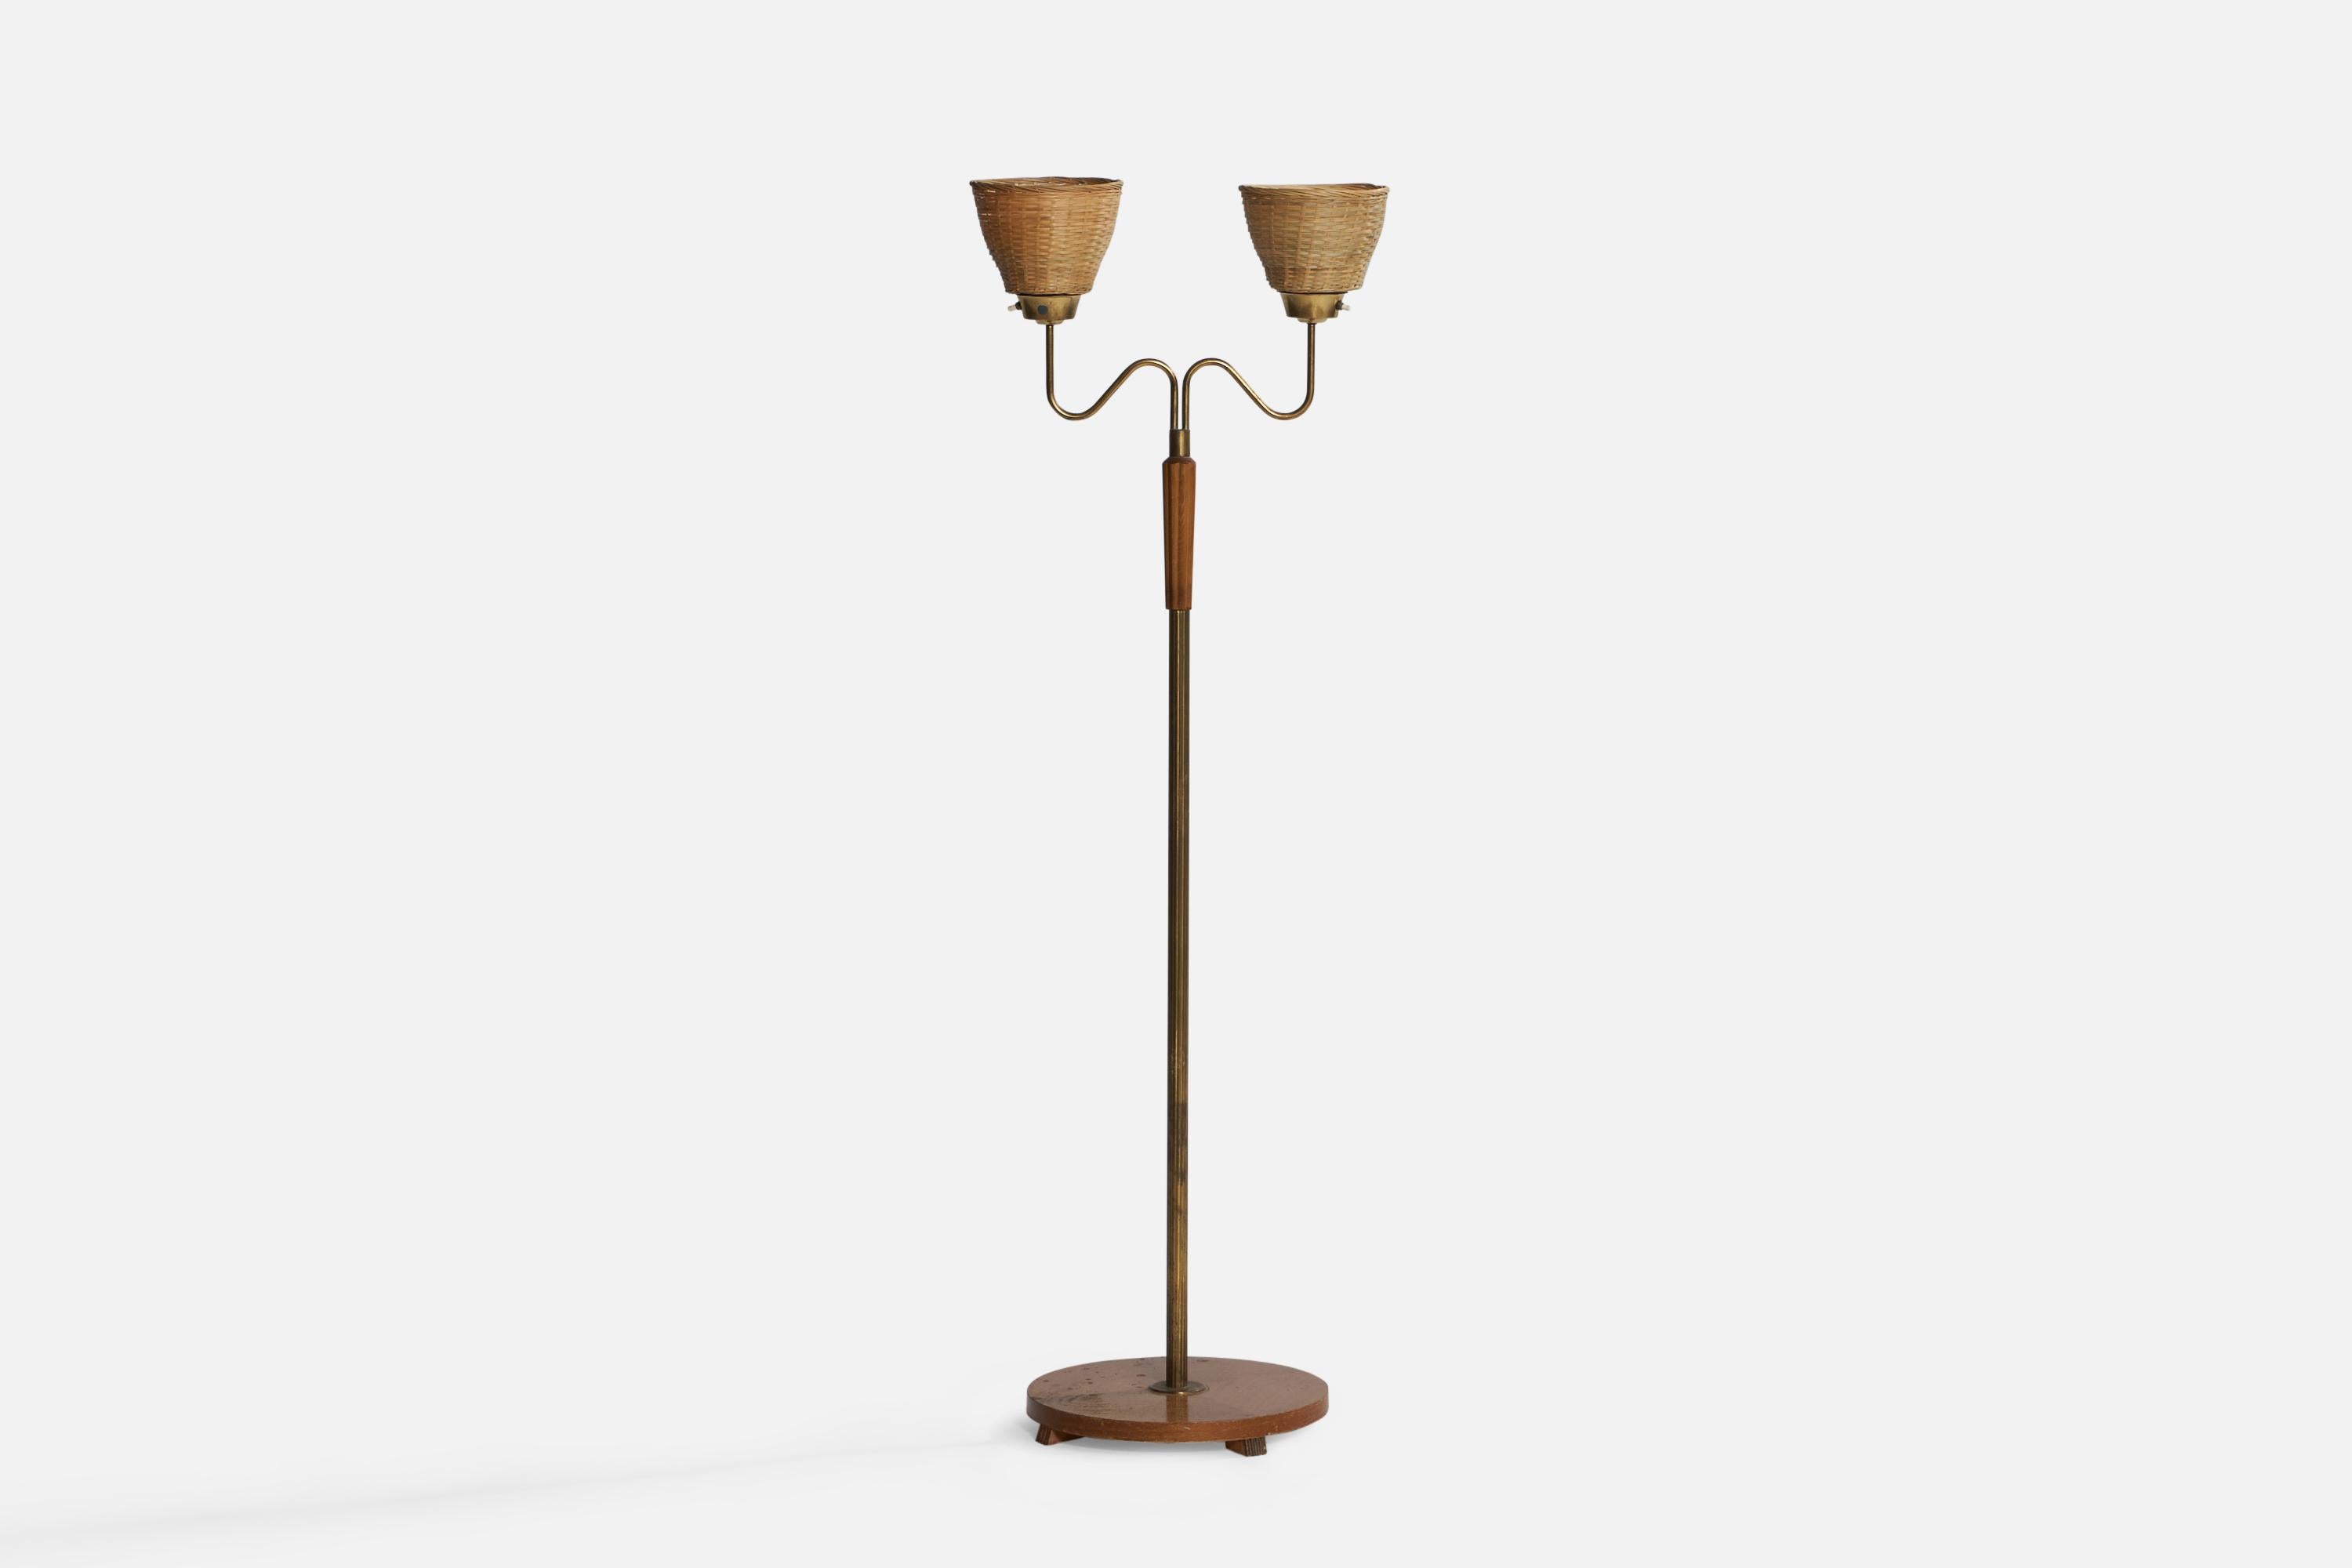 A two-armed brass, stained oak and rattan floor lamp designed and produced in Sweden, 1940s.

Overall Dimensions (inches): 59.1” H x 19.55” W x 14.5” D. Stated dimensions include shade.
Bulb Specifications: E-26 Bulbs
Number of Sockets: 2
All